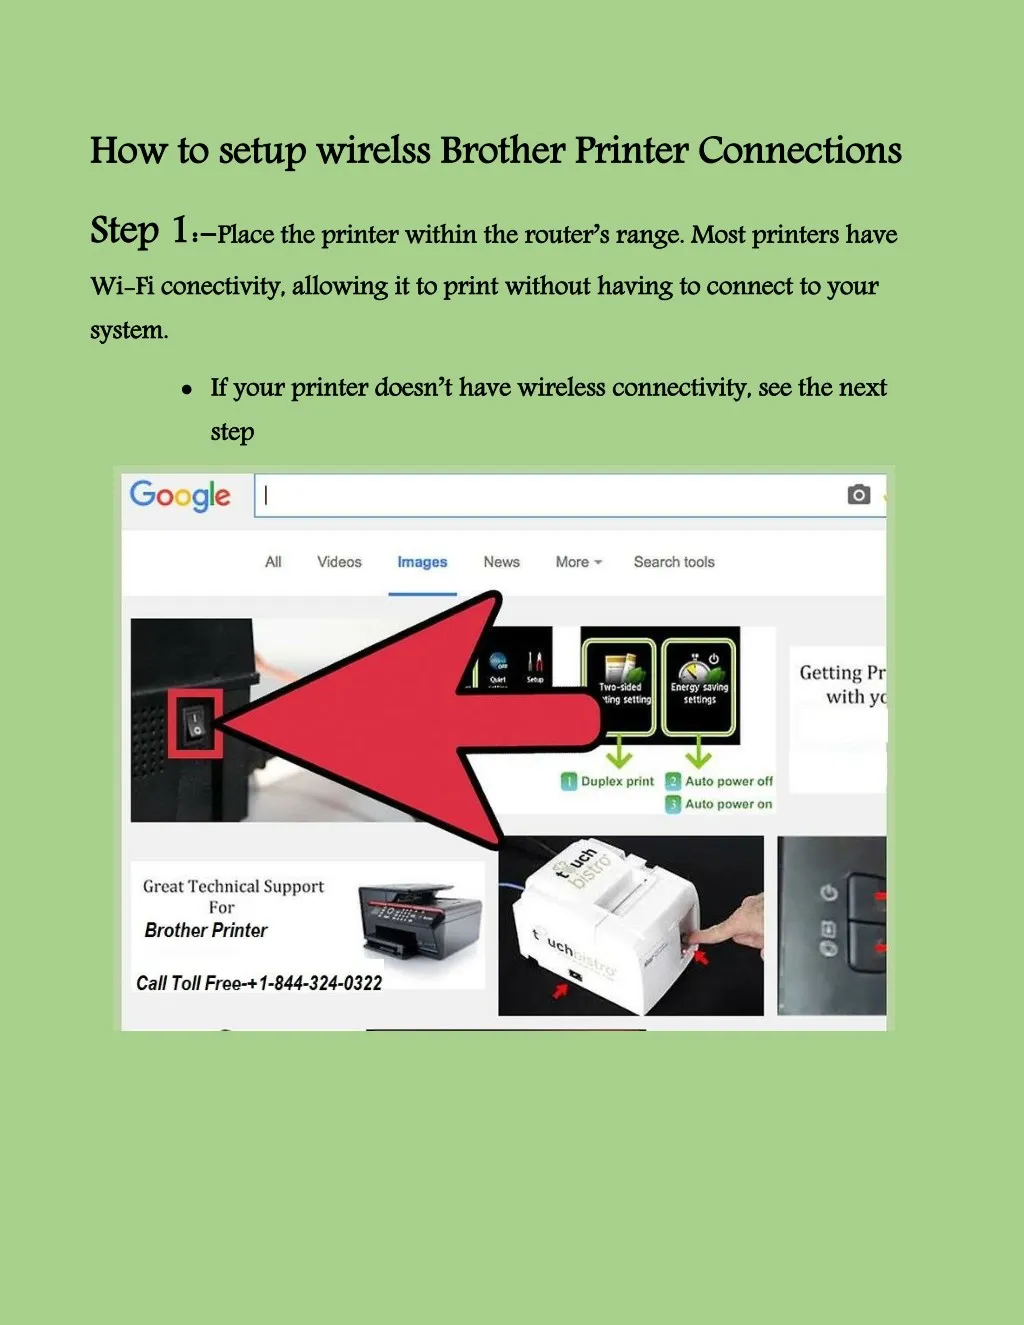 how to setup wirelss brother printer connections